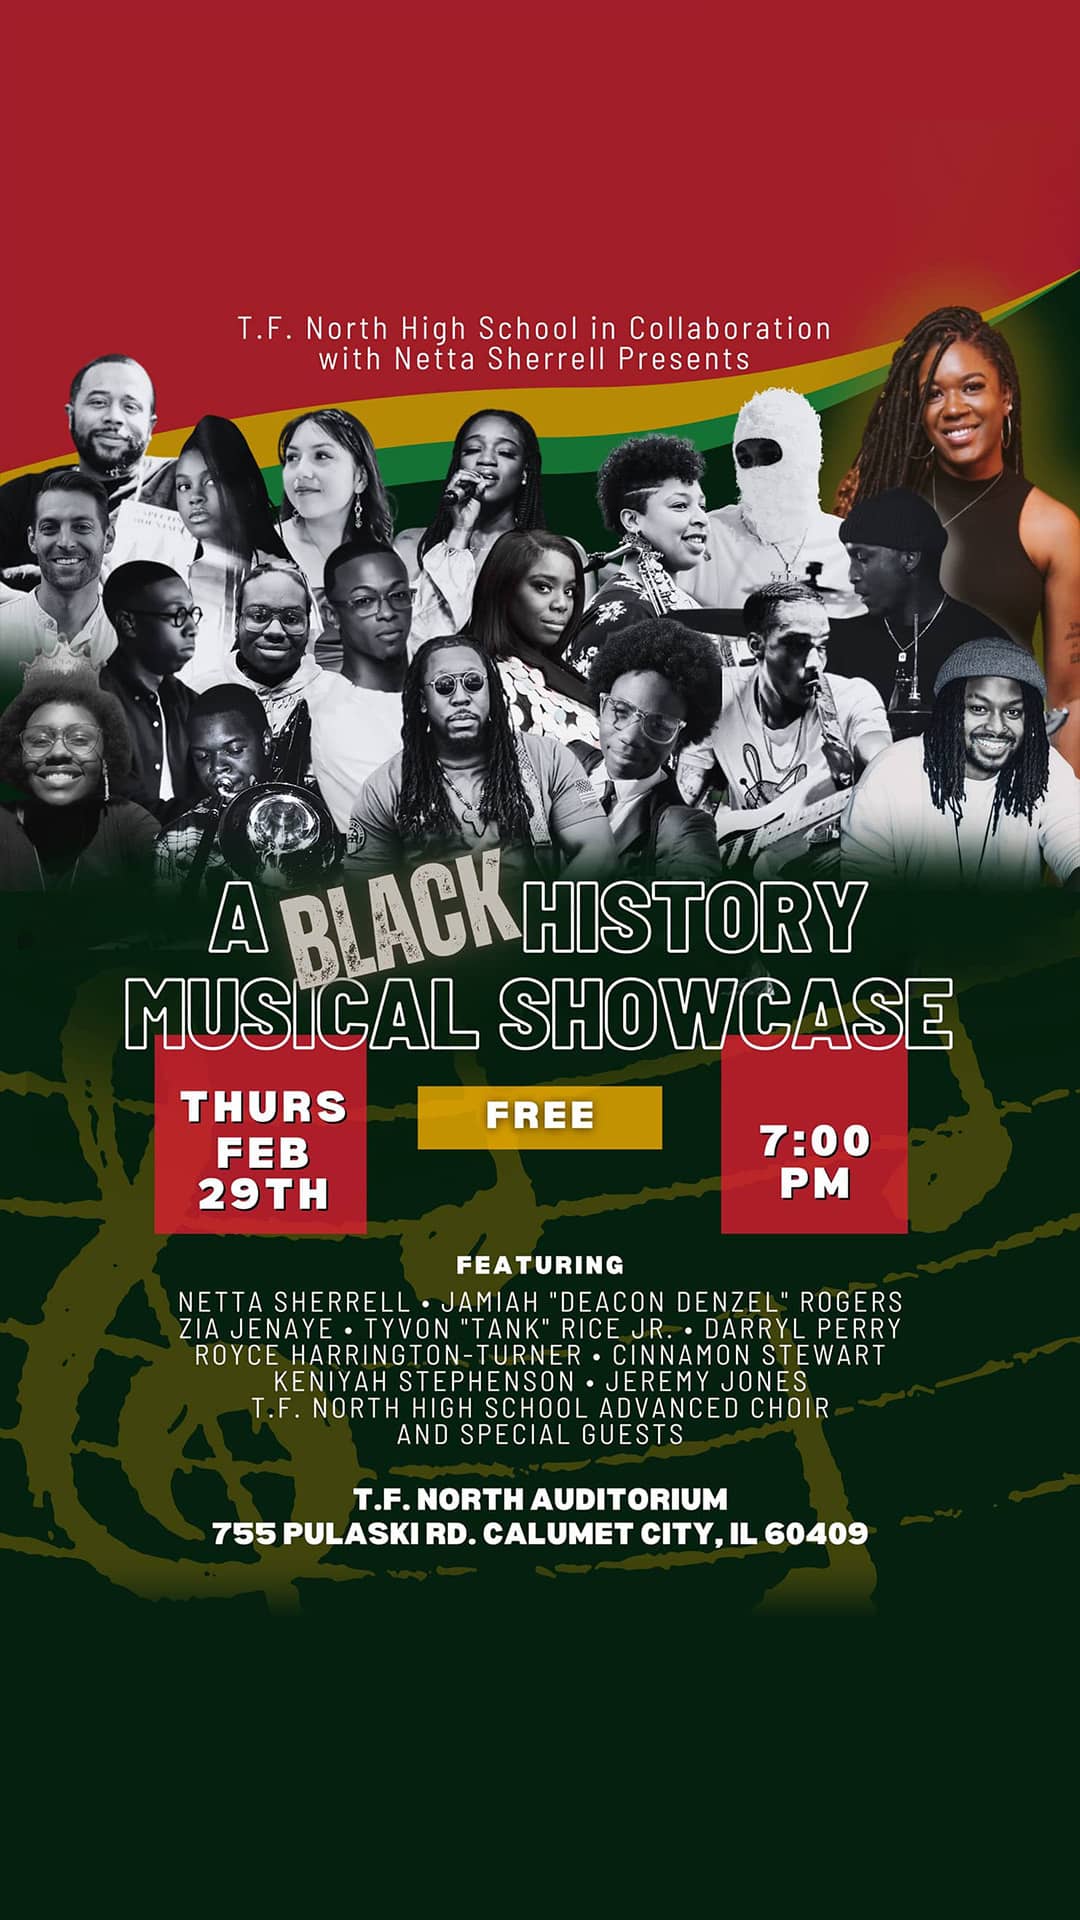 Poster for T.F. North High School's Black History Musical Showcase presented by Netta Sherrell on Thursday, February 29th at 7:00 PM. The event is free and features artists such as Netta Sherrell, Jamiah 'Deacon Denzel' Rogers, and others, held at T.F. North Auditorium, Calumet City, IL.